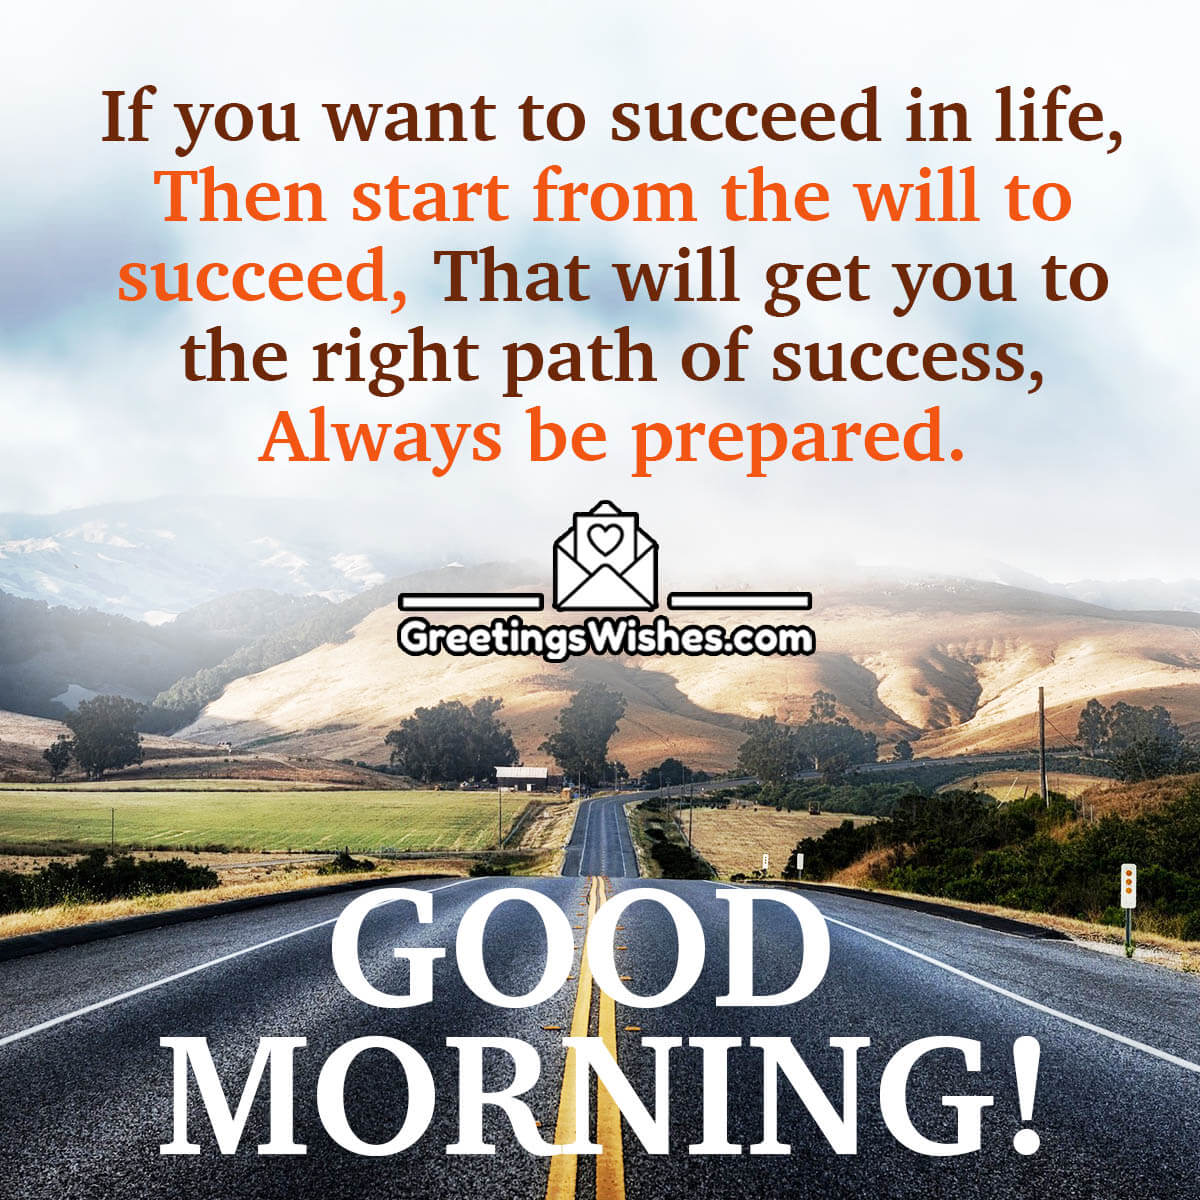 Inspirational Good Morning Wishes